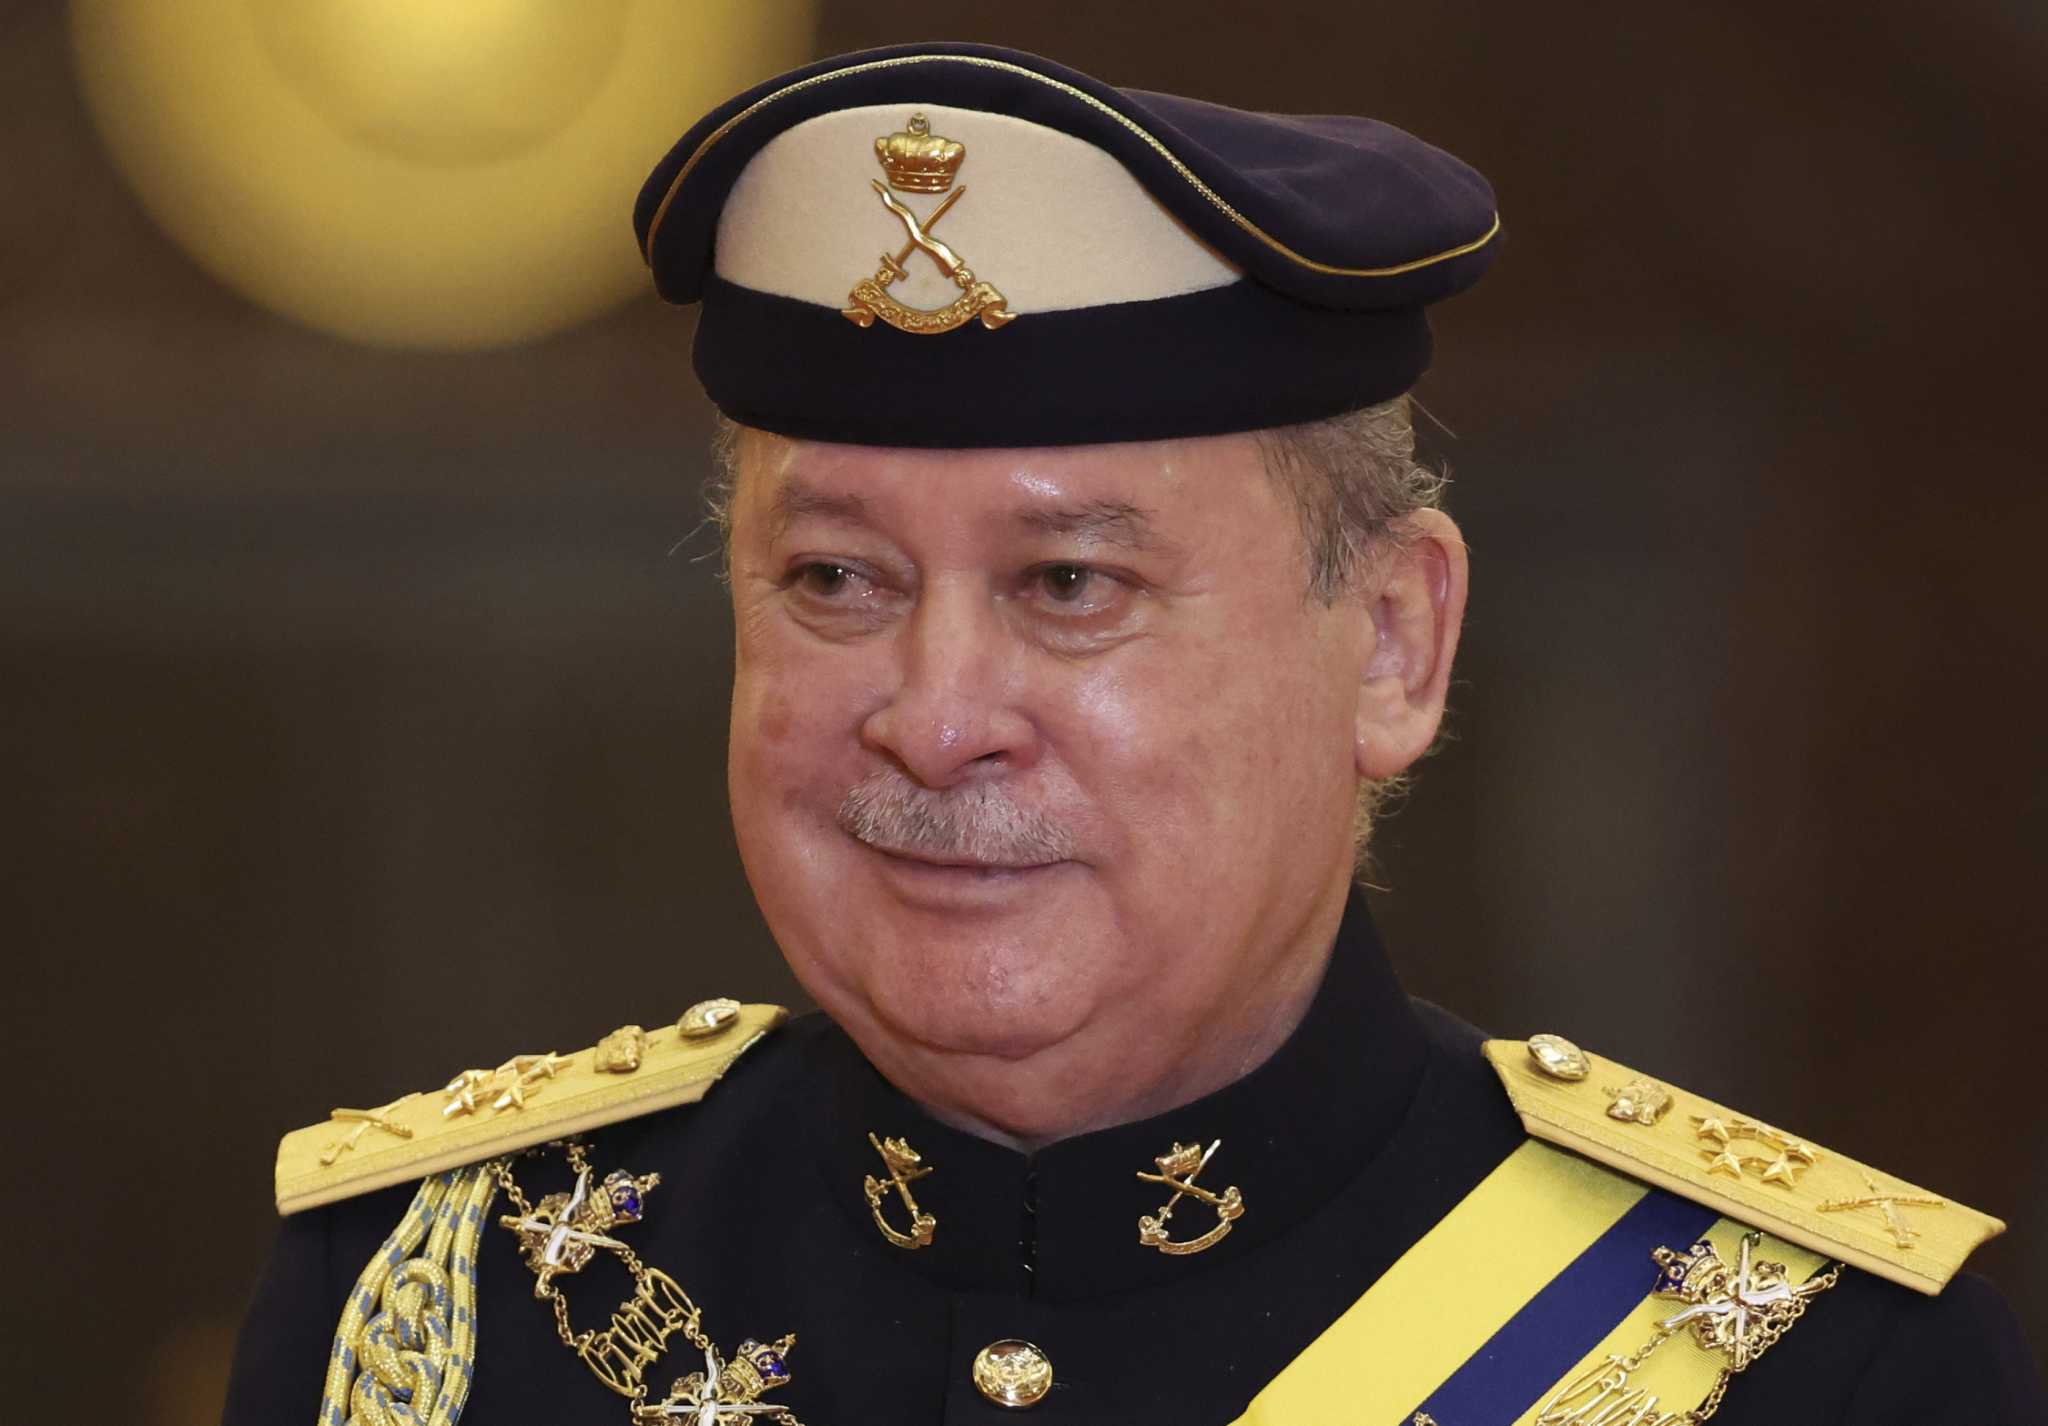 What to know about Malaysia's coronation of its king, Sultan Ibrahim Iskandar